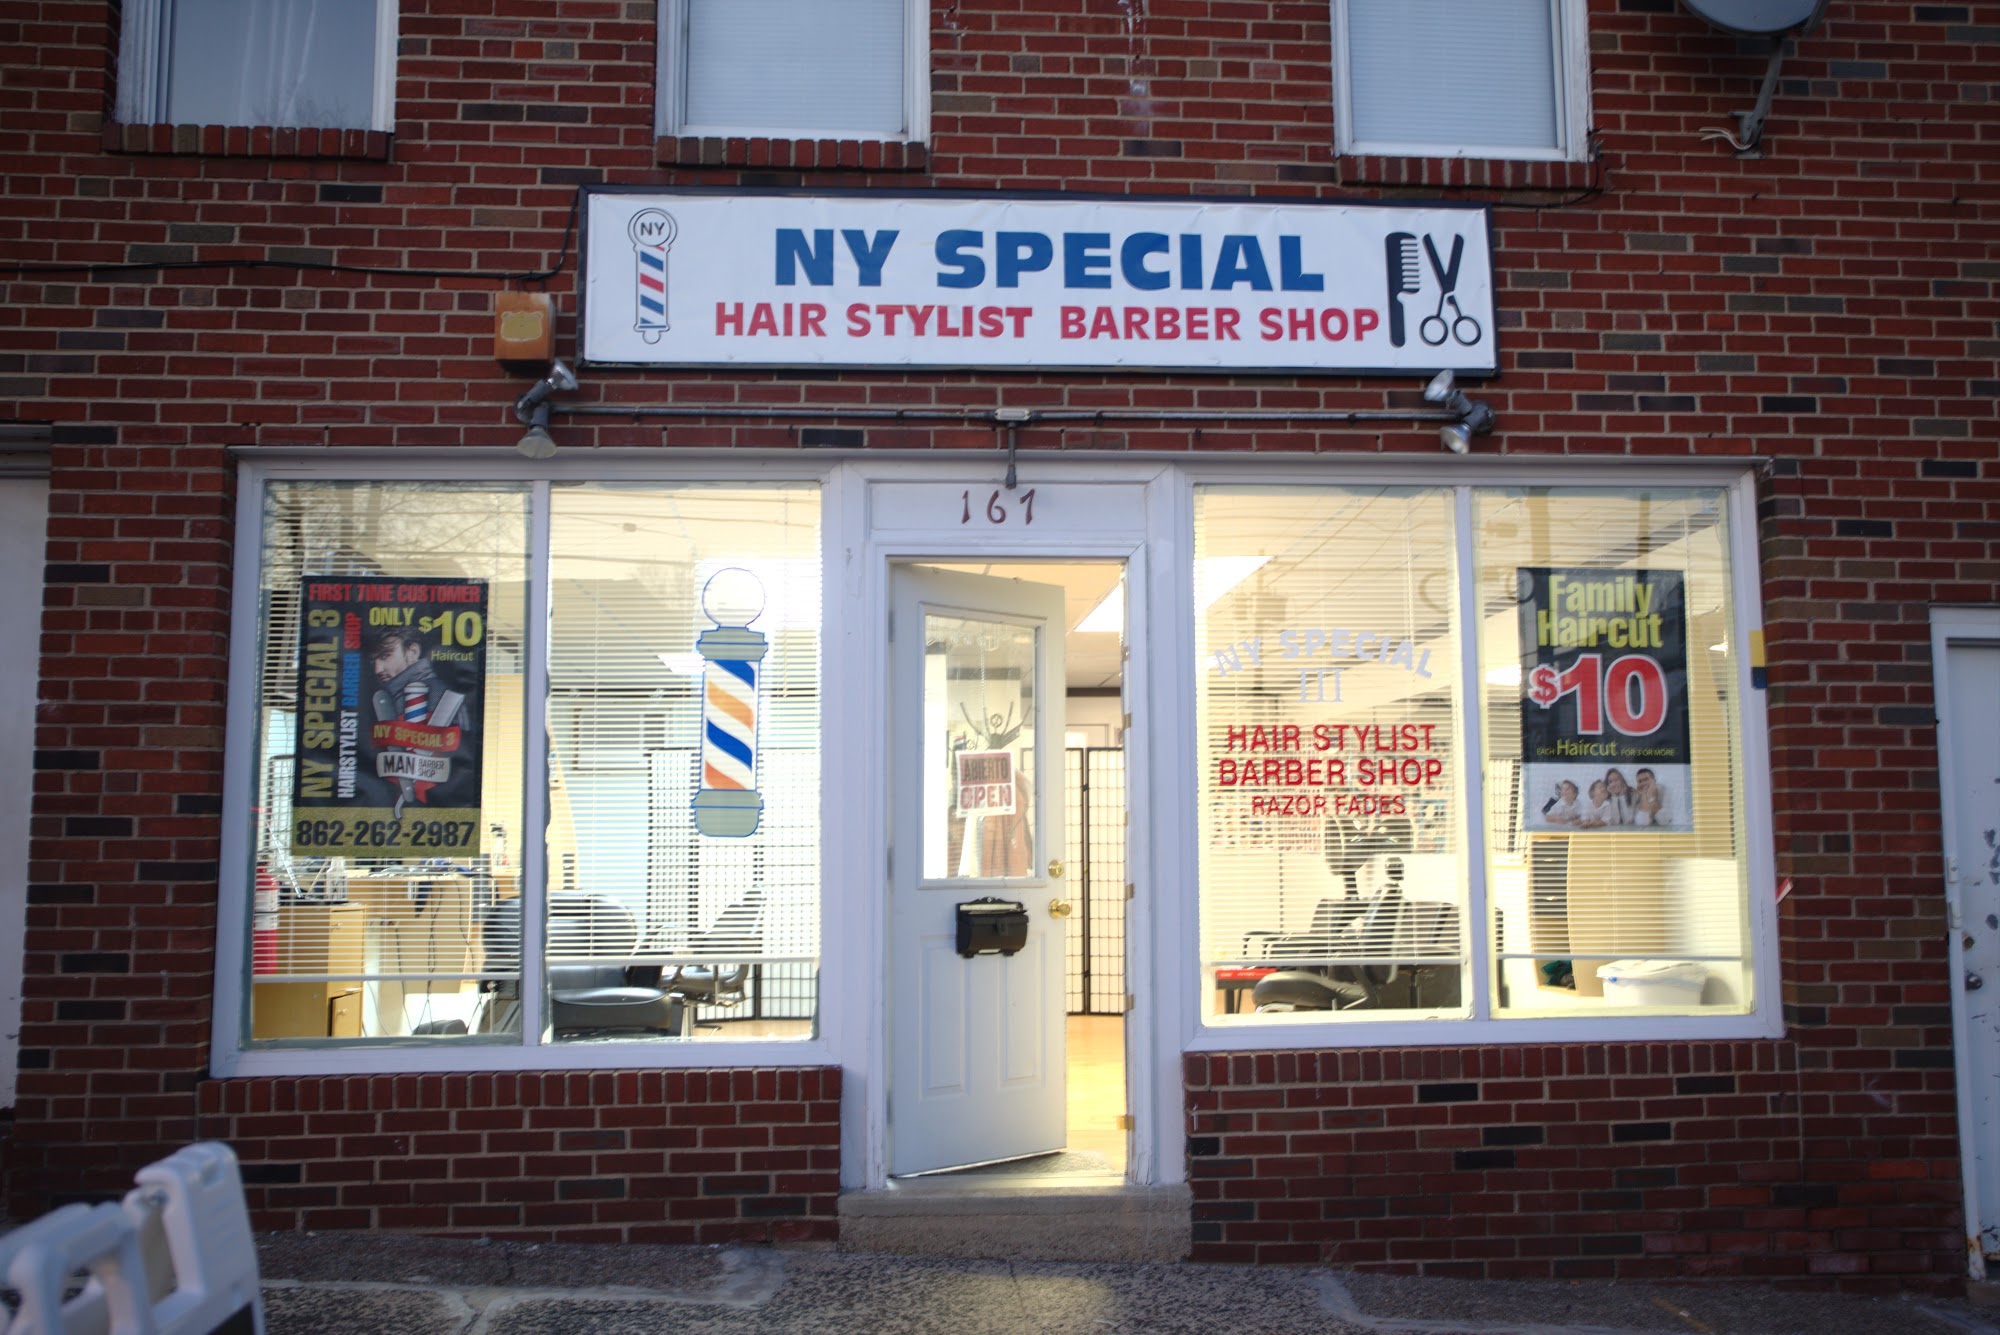 NY Special Hair Stylist Barber Shop